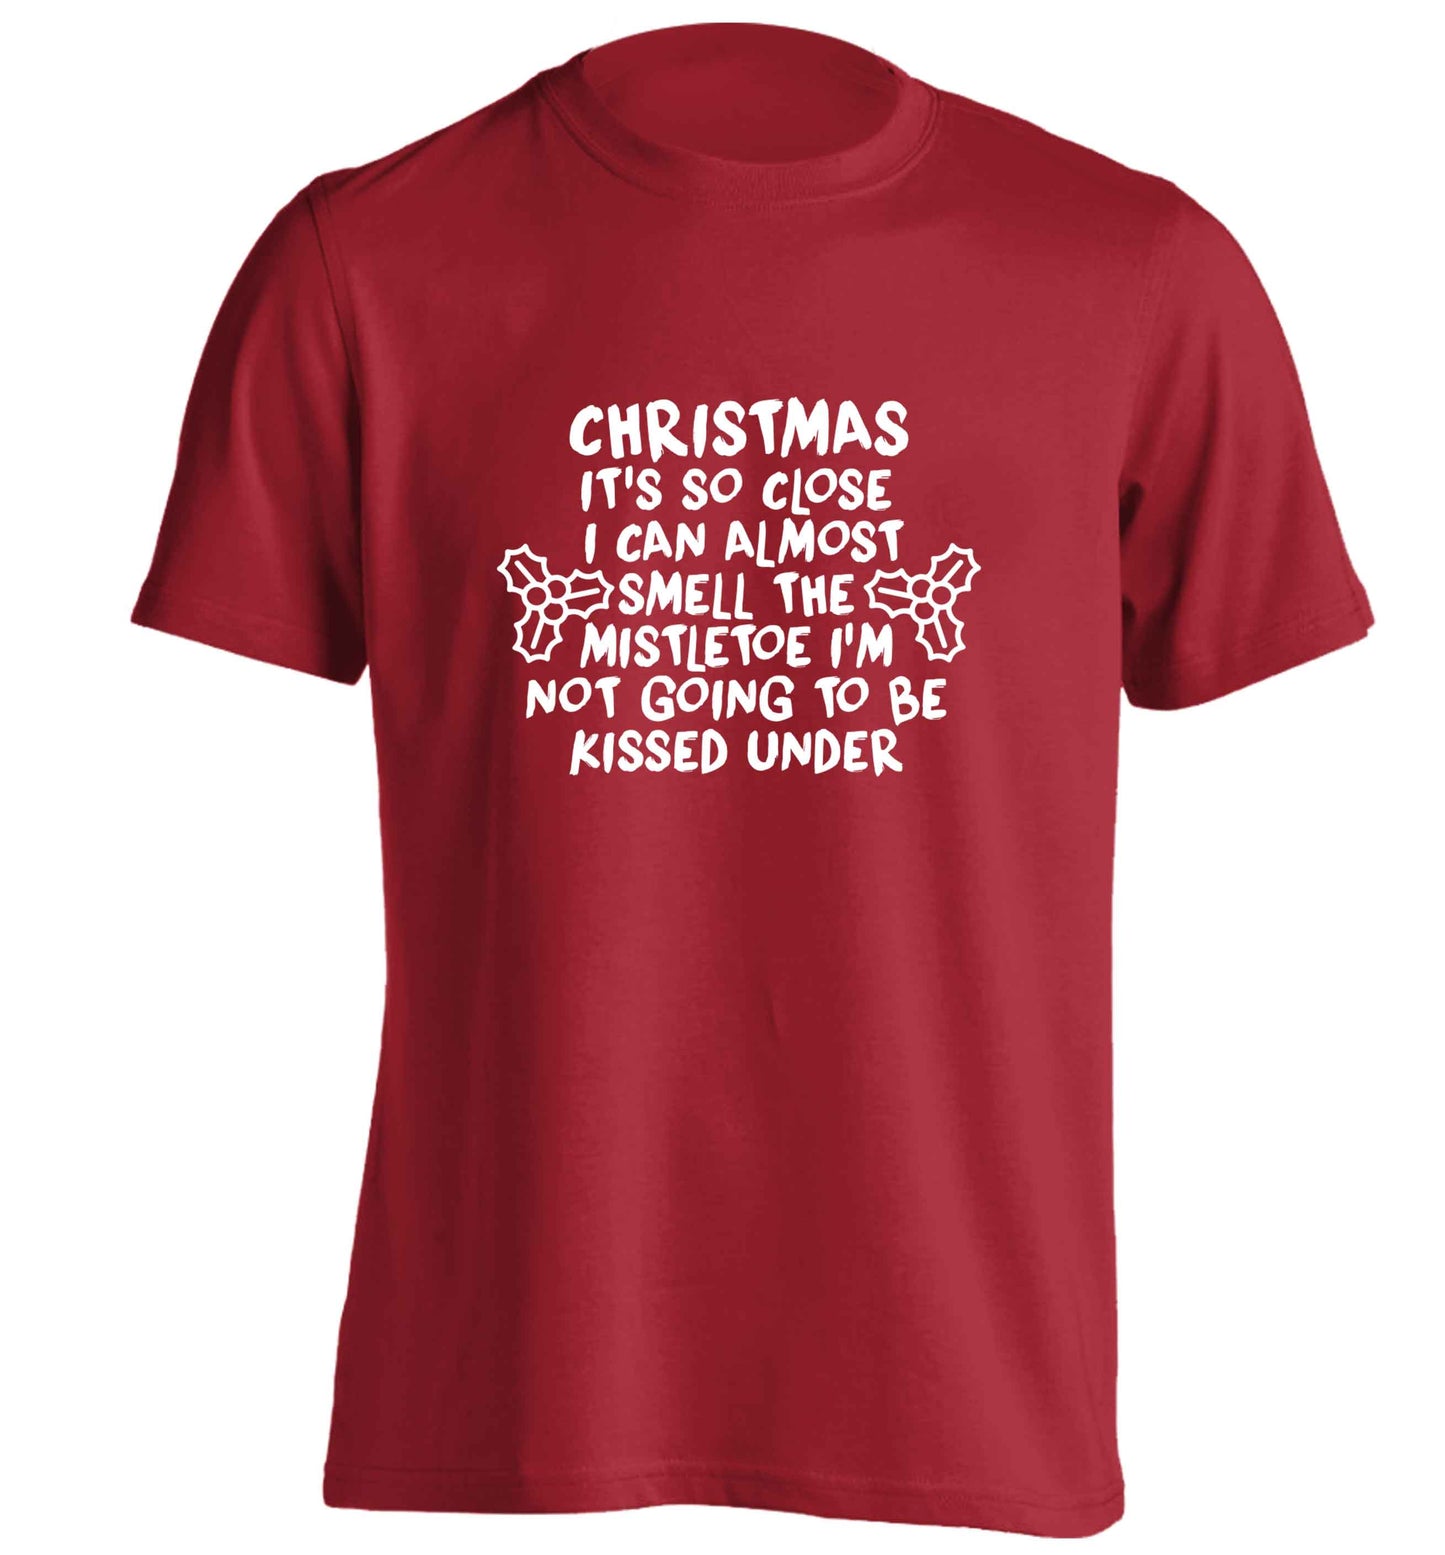 Christmas it's so close I can almost smell the misteltoe I'm not going to be kissed under adults unisex red Tshirt 2XL